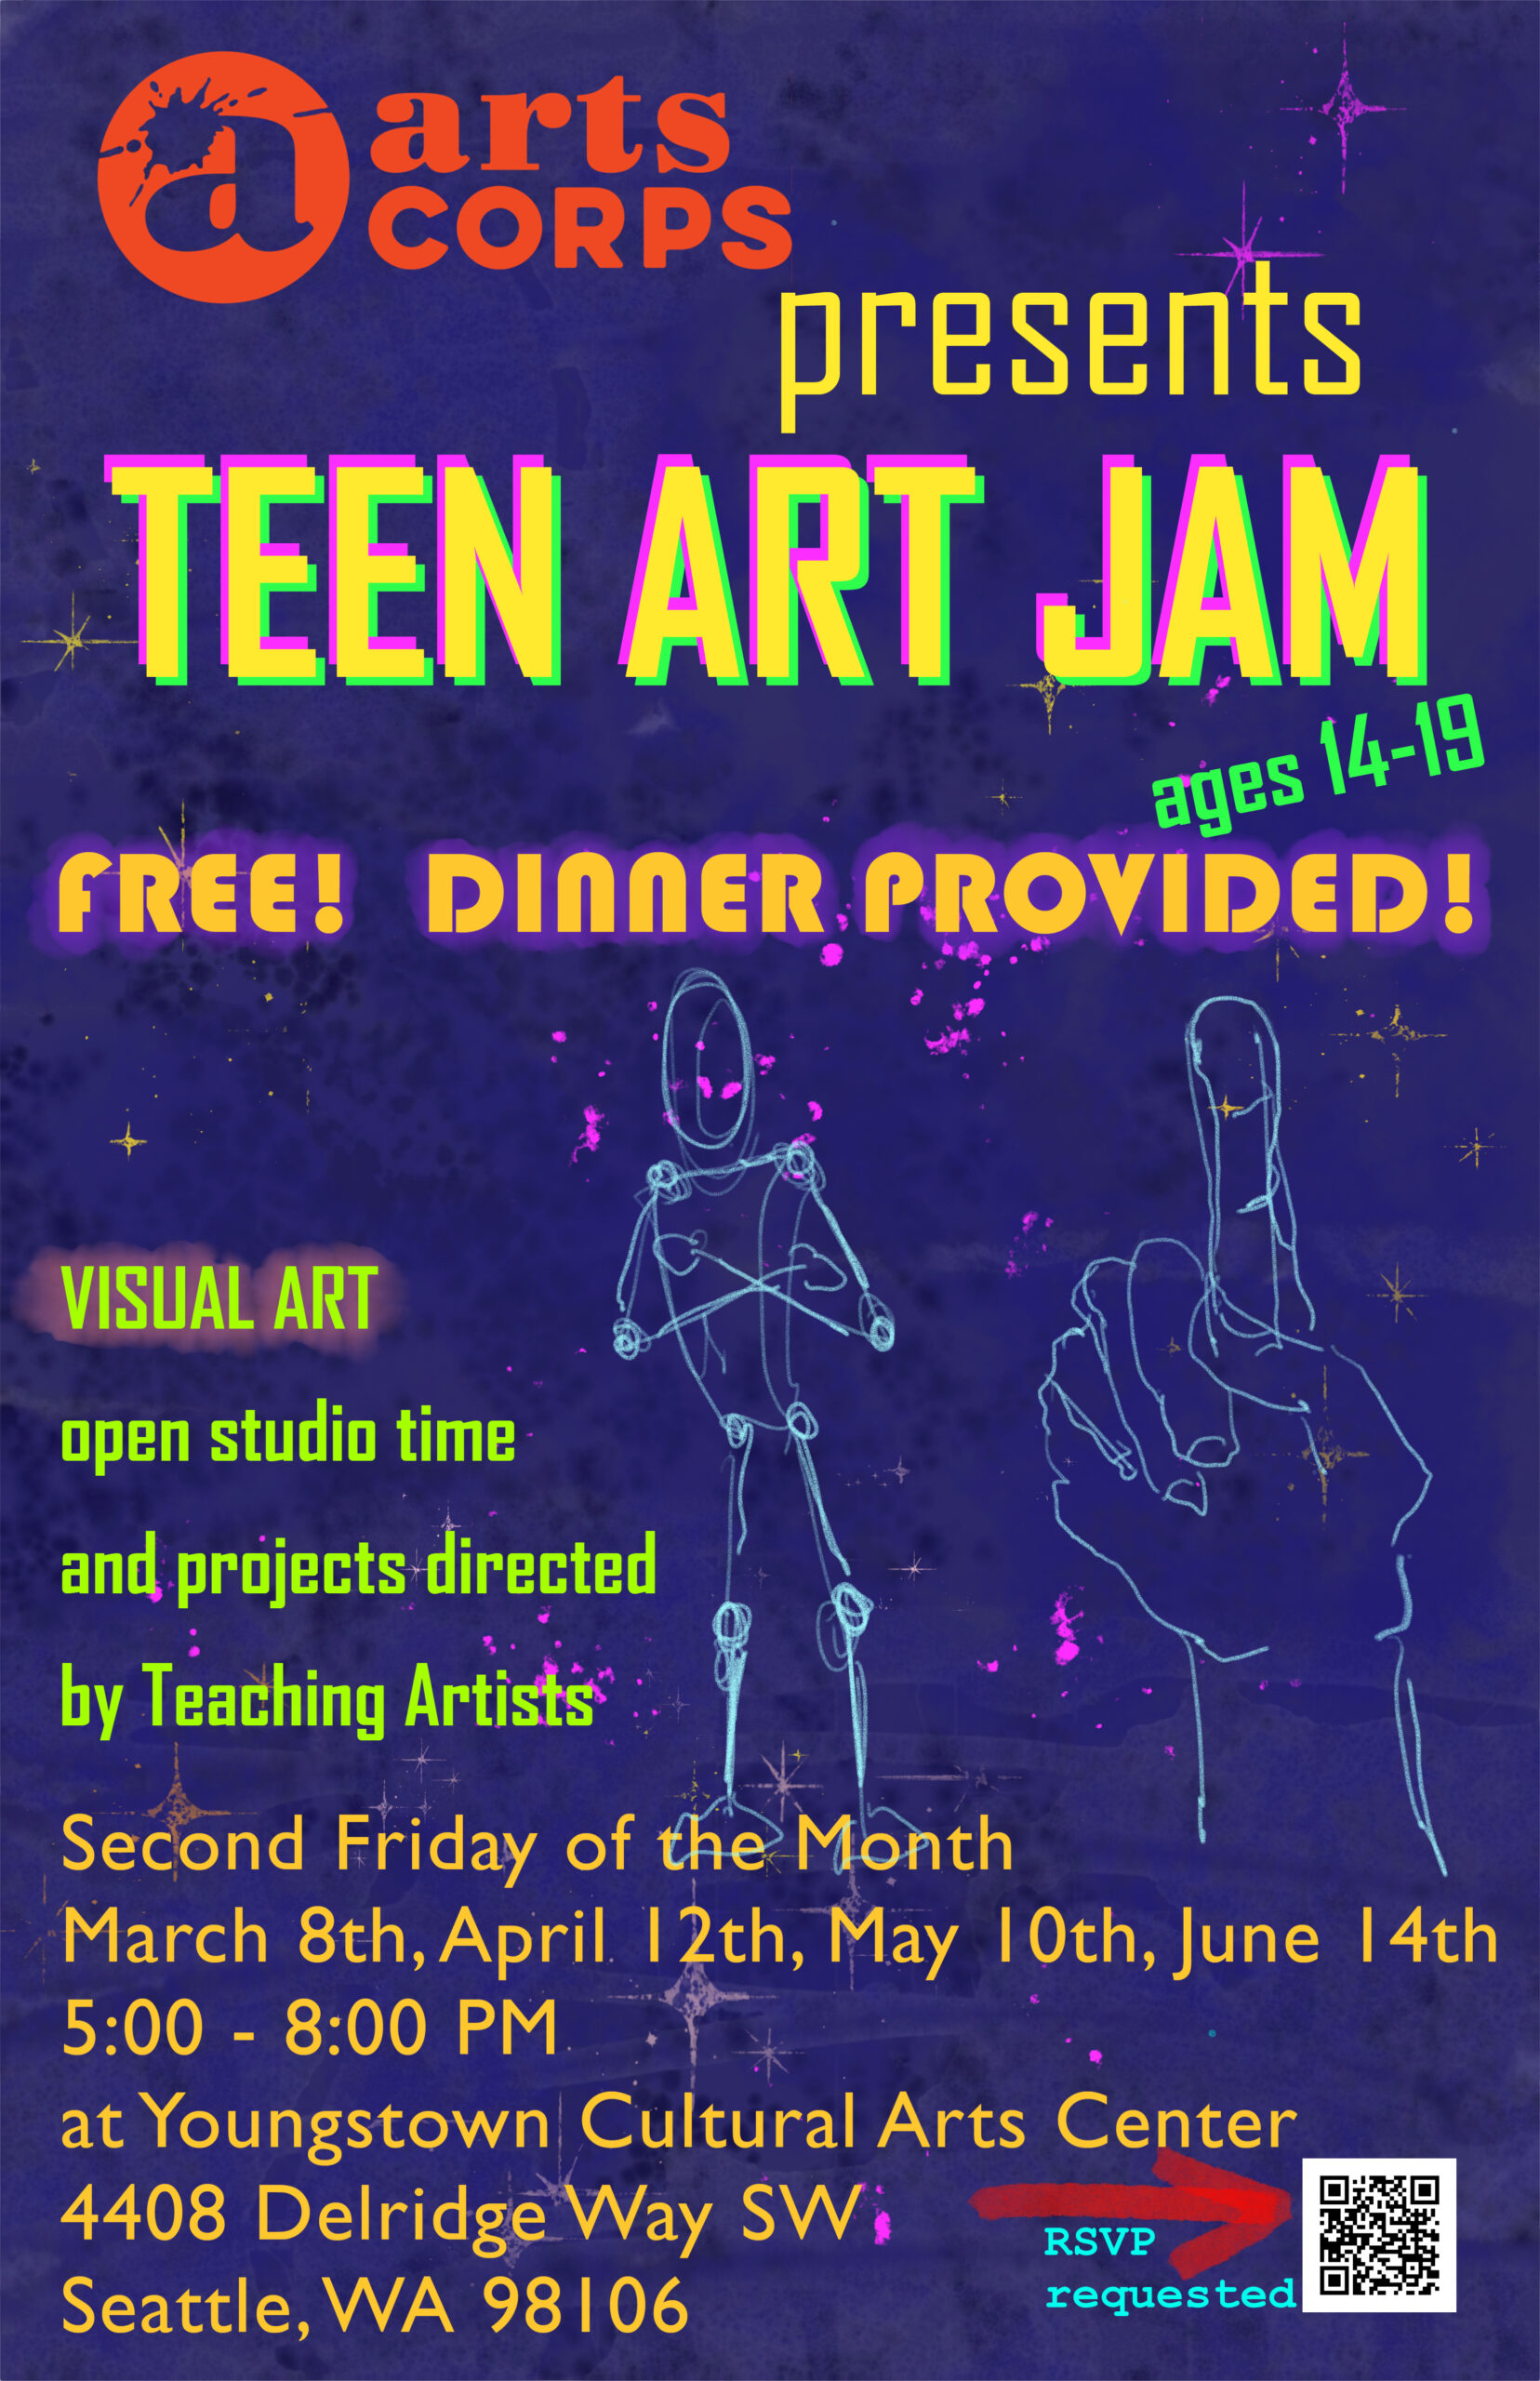 Arts Corps Teen Art Jam flyer with dates, location, and application QR code. "Free! Dinner provided! Ages 14-19"